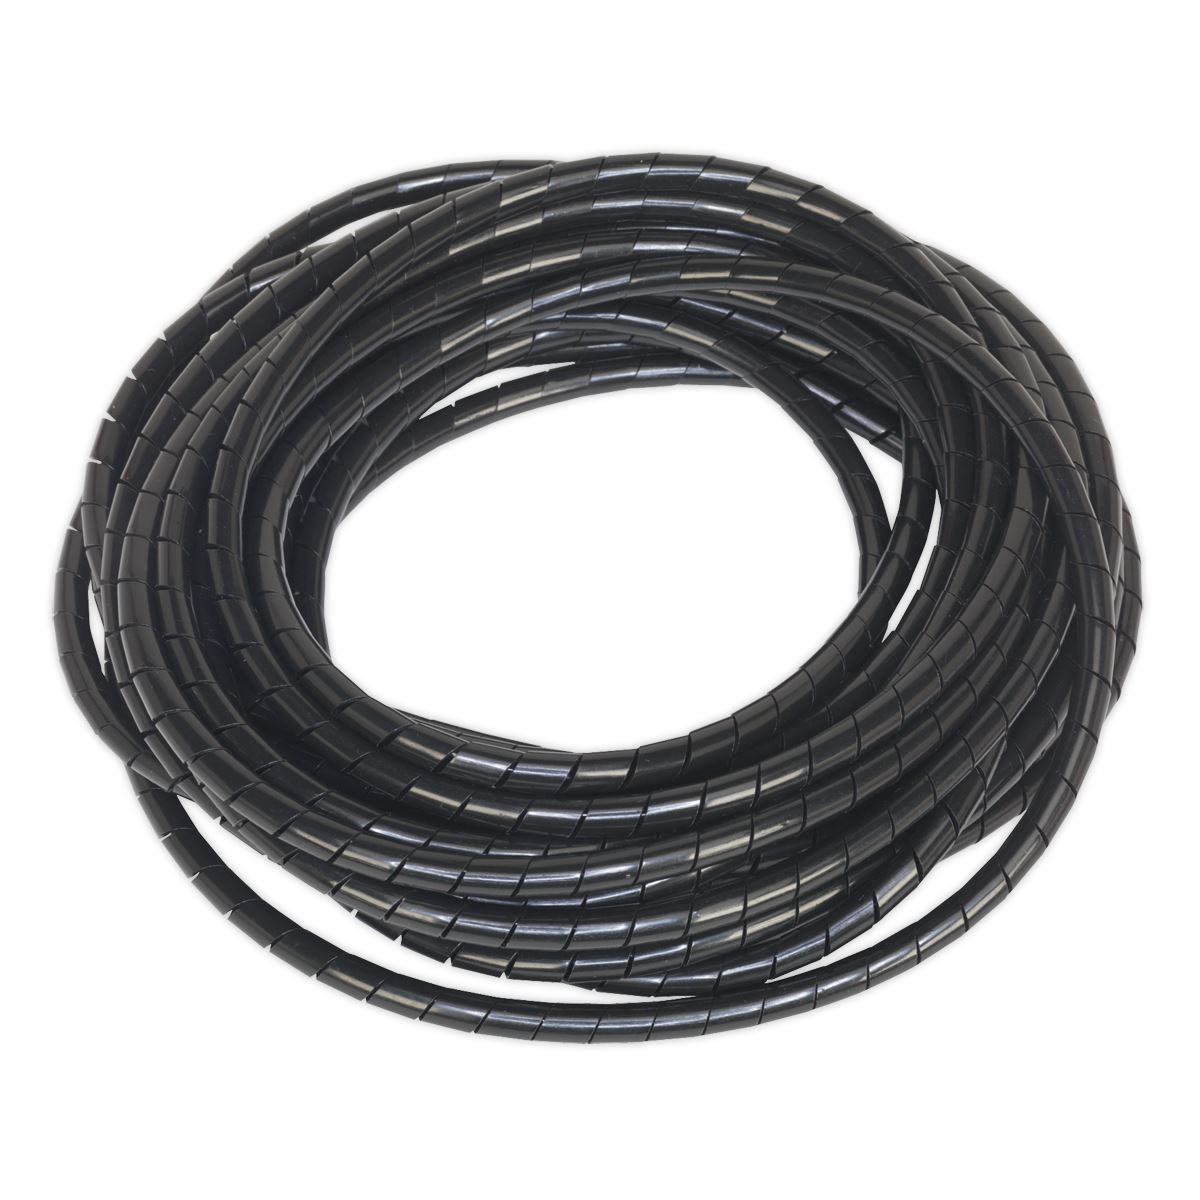 Sealey Spiral Wrap Cable Sleeving Ø8-16mm 10m